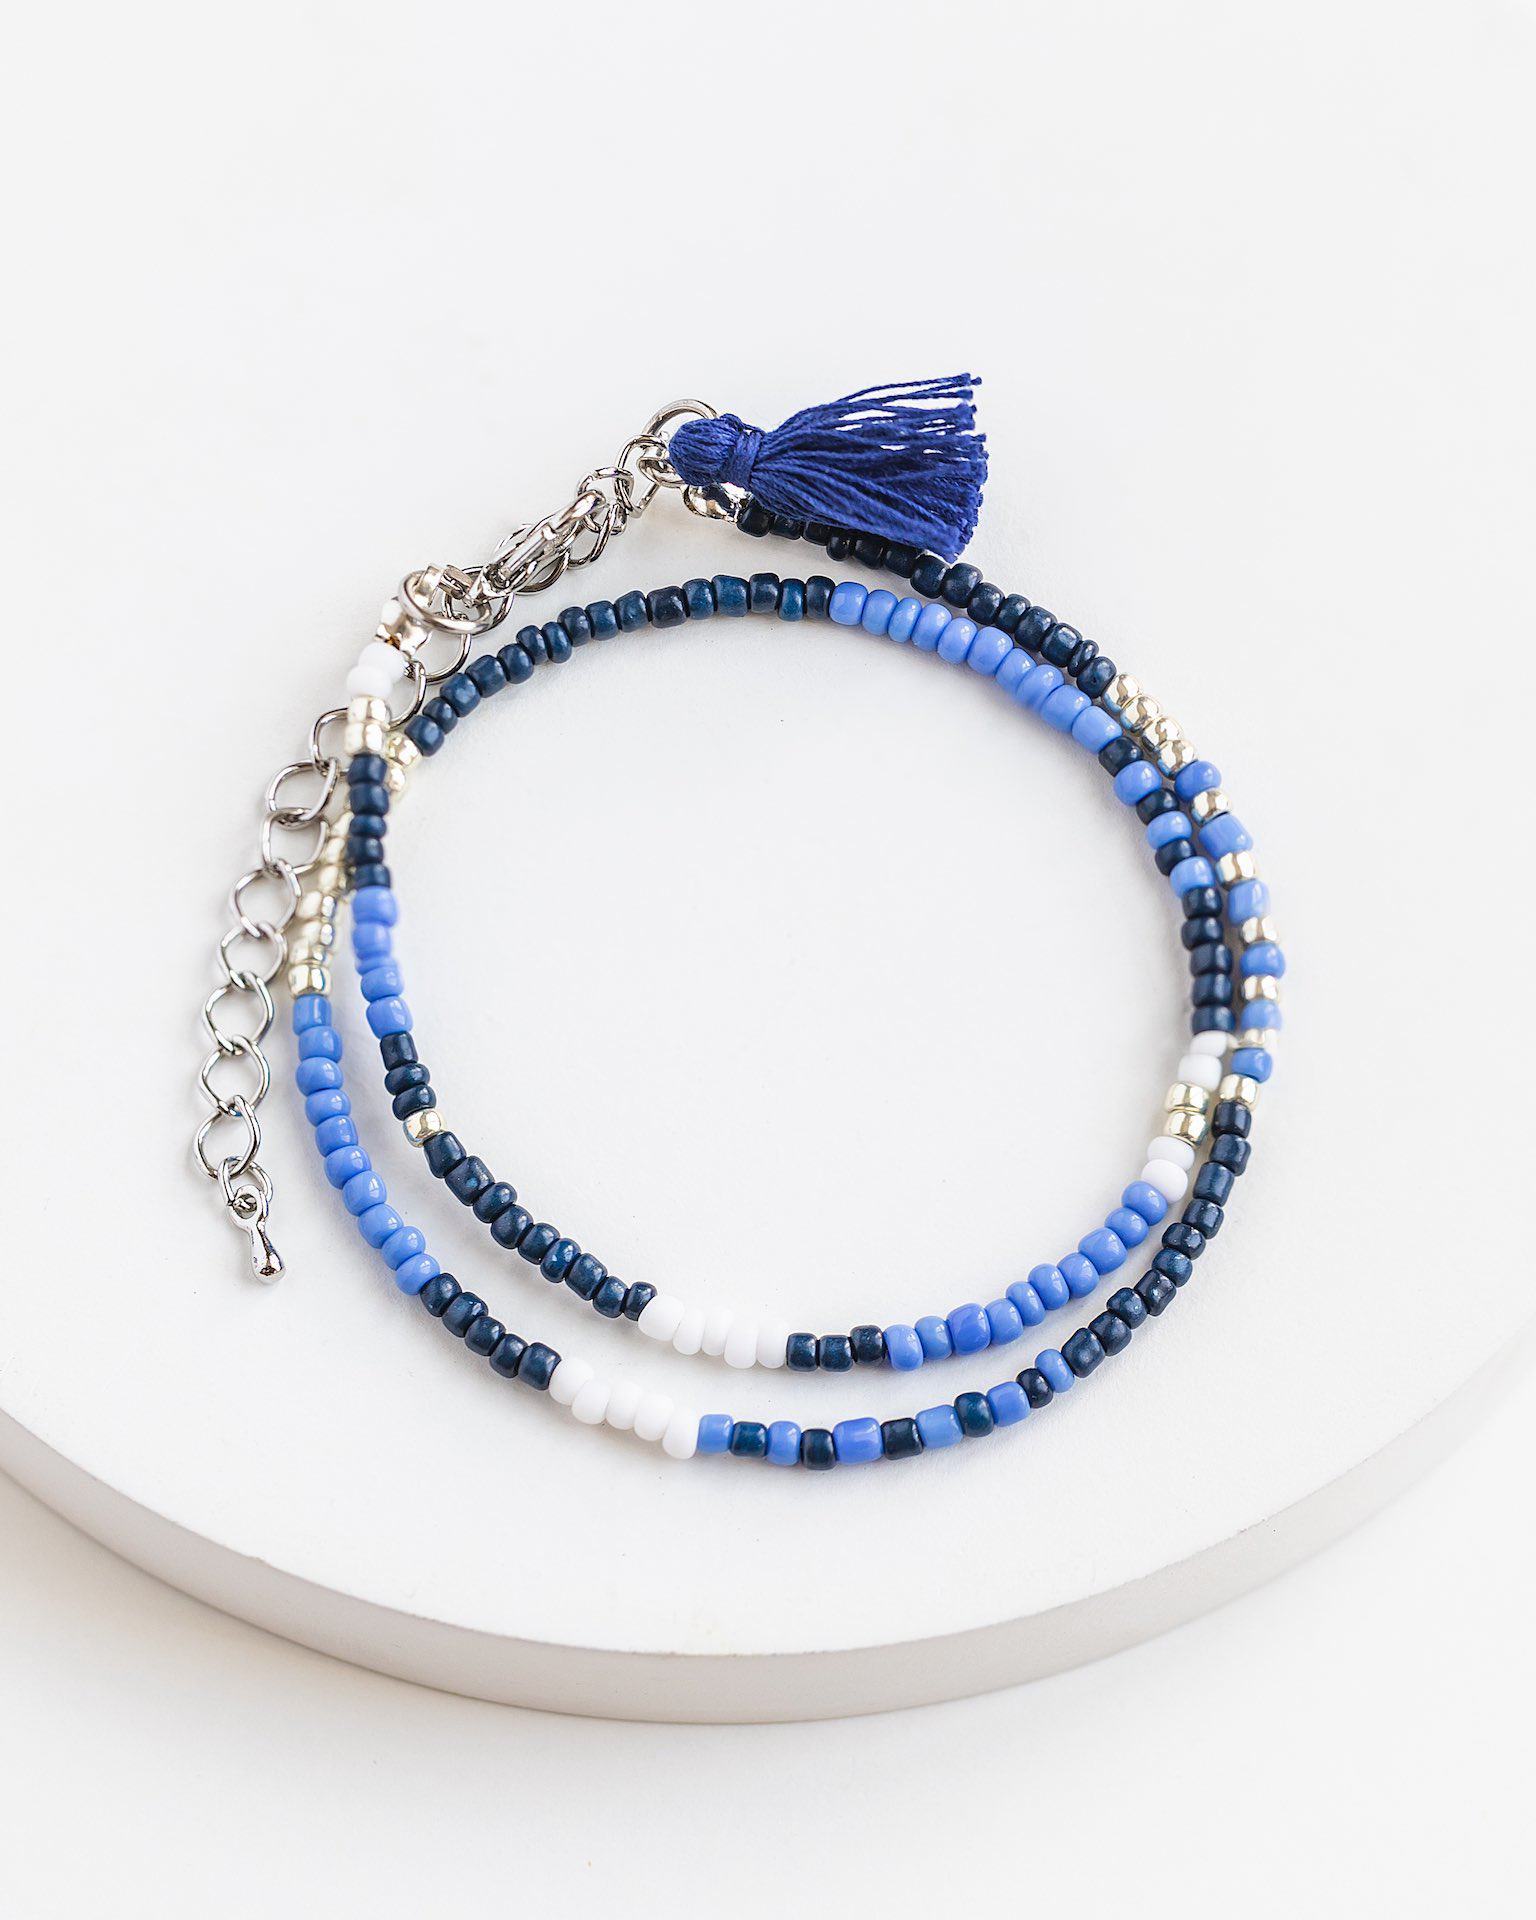 Feeling BOLD in Blue and Brown...Big Choose from 2 sizes! Beautiful Bold OOAK Natural Sodalite Woven Boho Bracelets